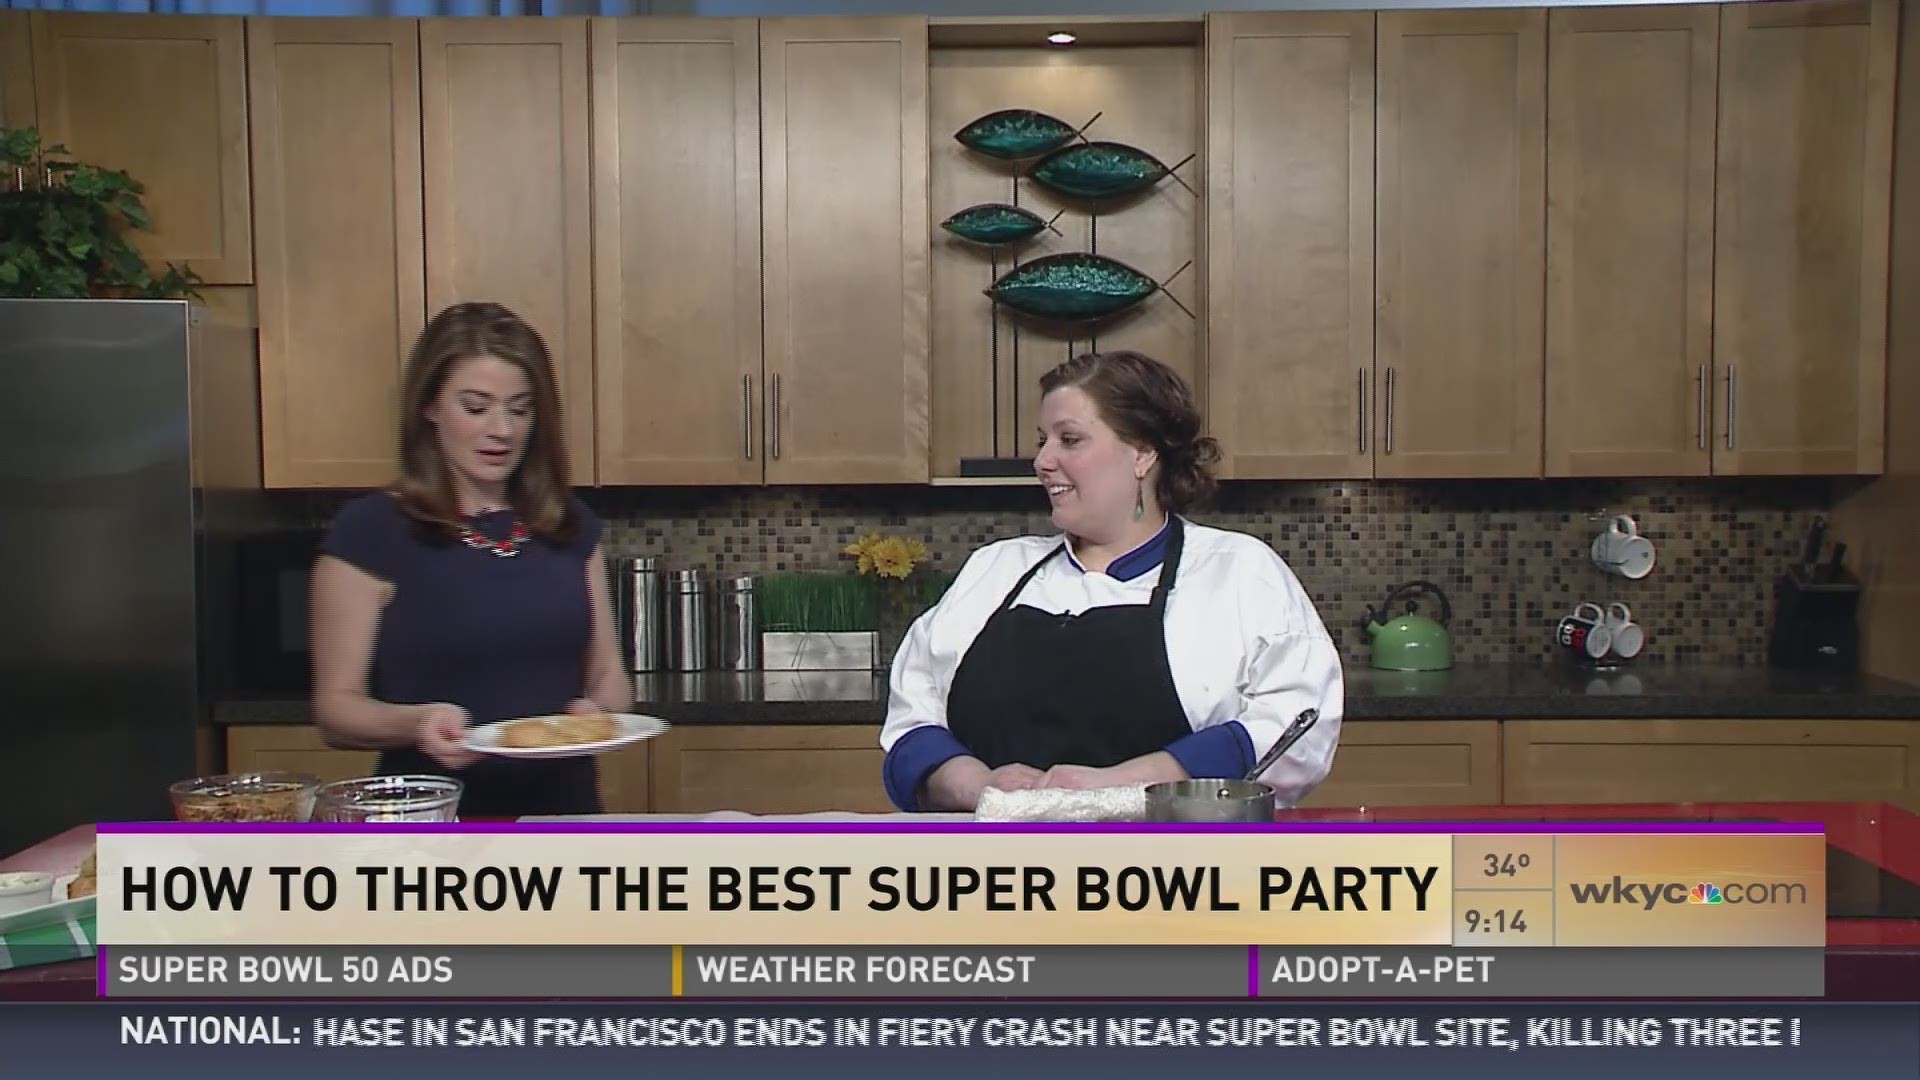 Chef Stefanie Paganini has food and decorating ideas for your Super Bowl Party.